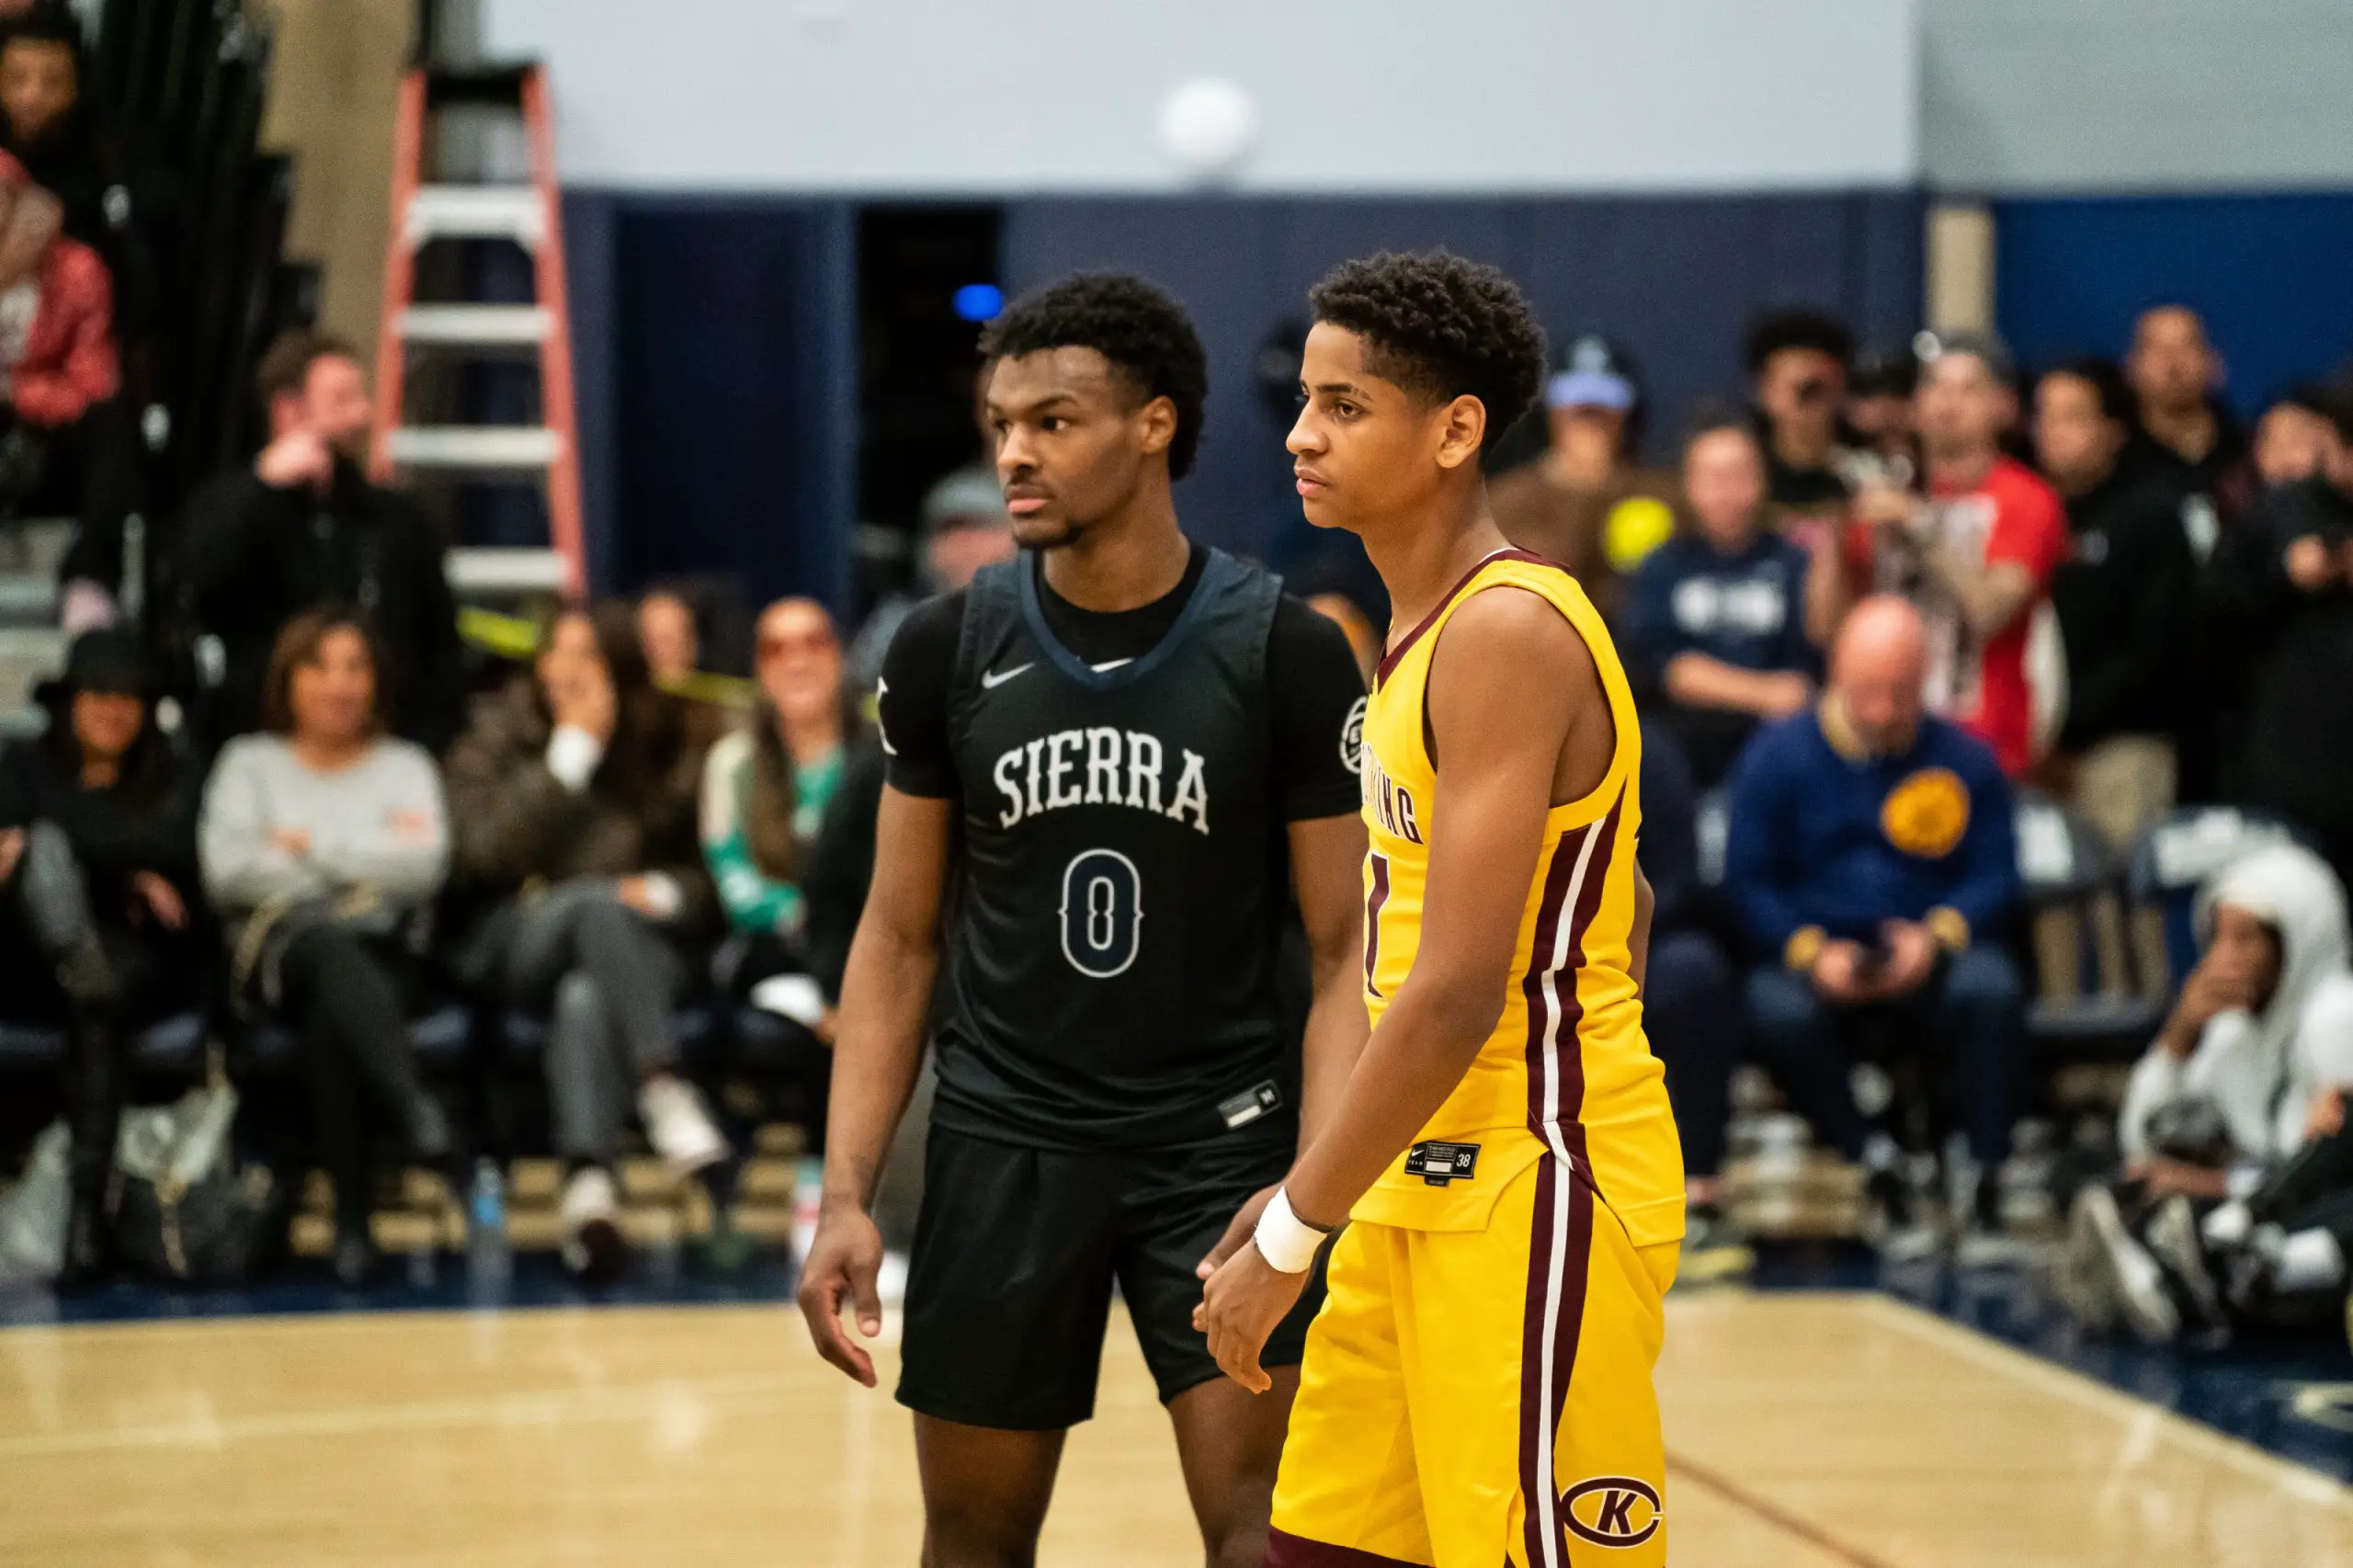 Bronny James #0 plays against Kiyan Anthony #11 at the Sierra Canyon vs Christ The King boys basketball game at Sierra Canyon High School on December 12, 2022 in Chatsworth, California.